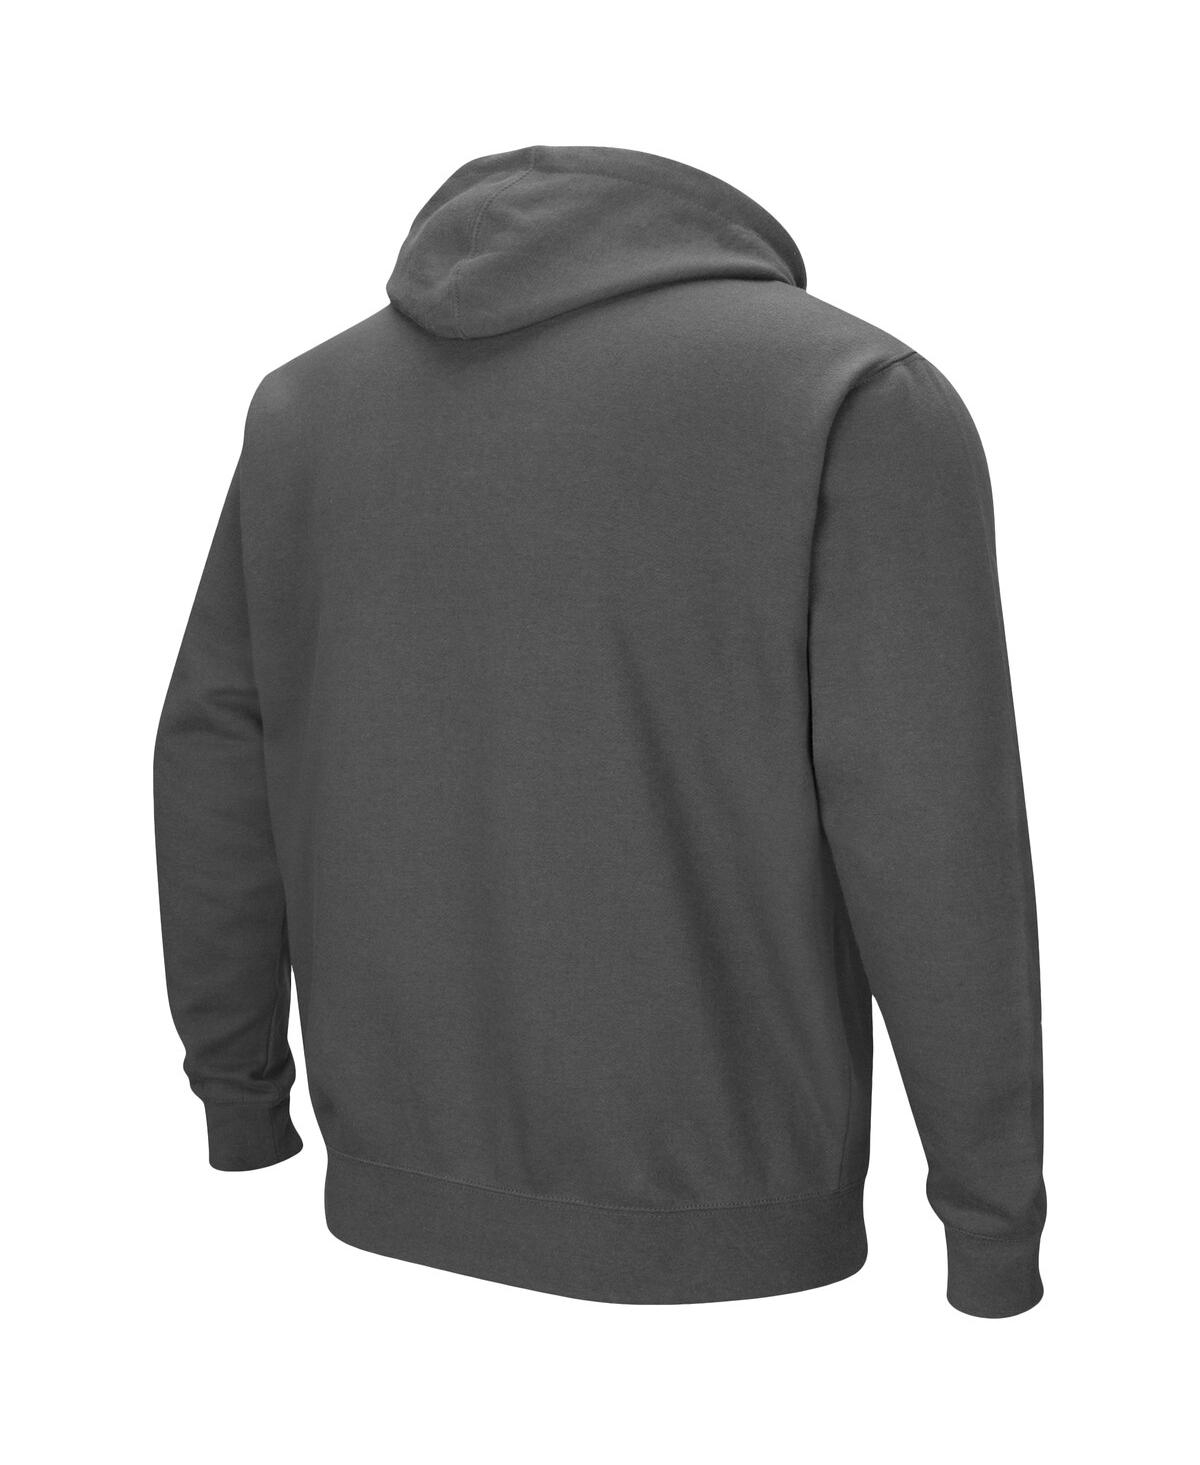 Shop Colosseum Men's Charcoal Cornell Big Red Arch And Logo Pullover Hoodie